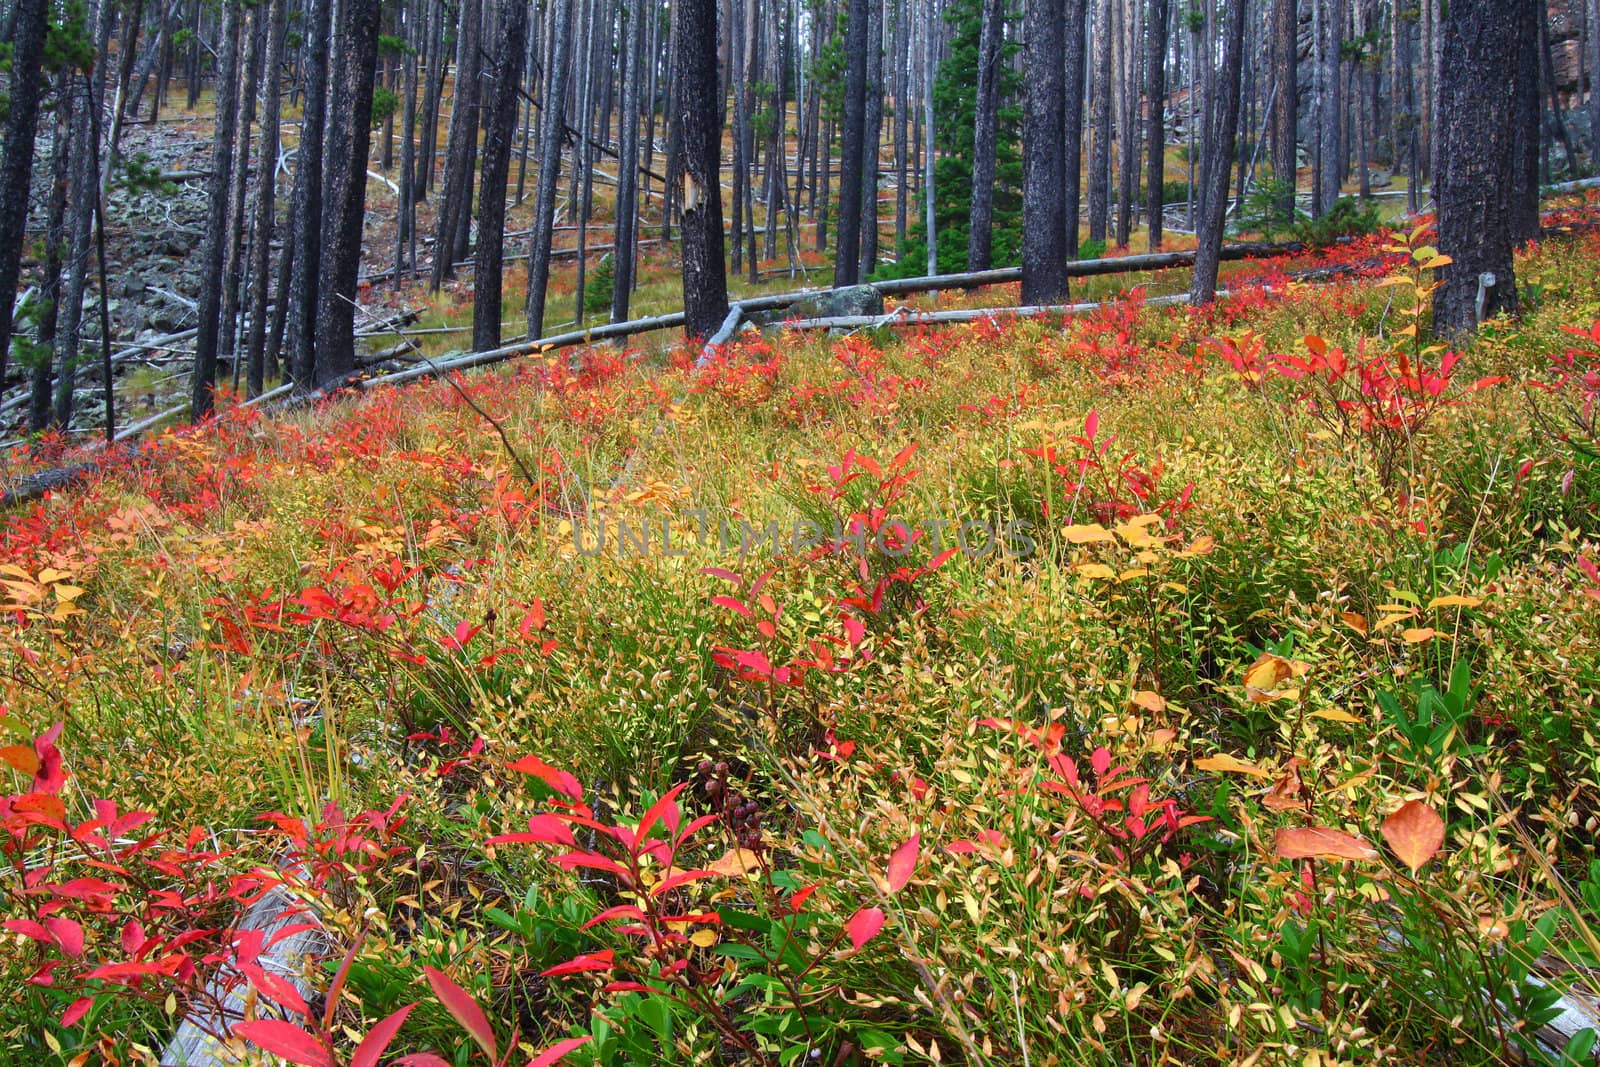 Bright autumn colors in the Lewis and Clark National Forest of central Montana.